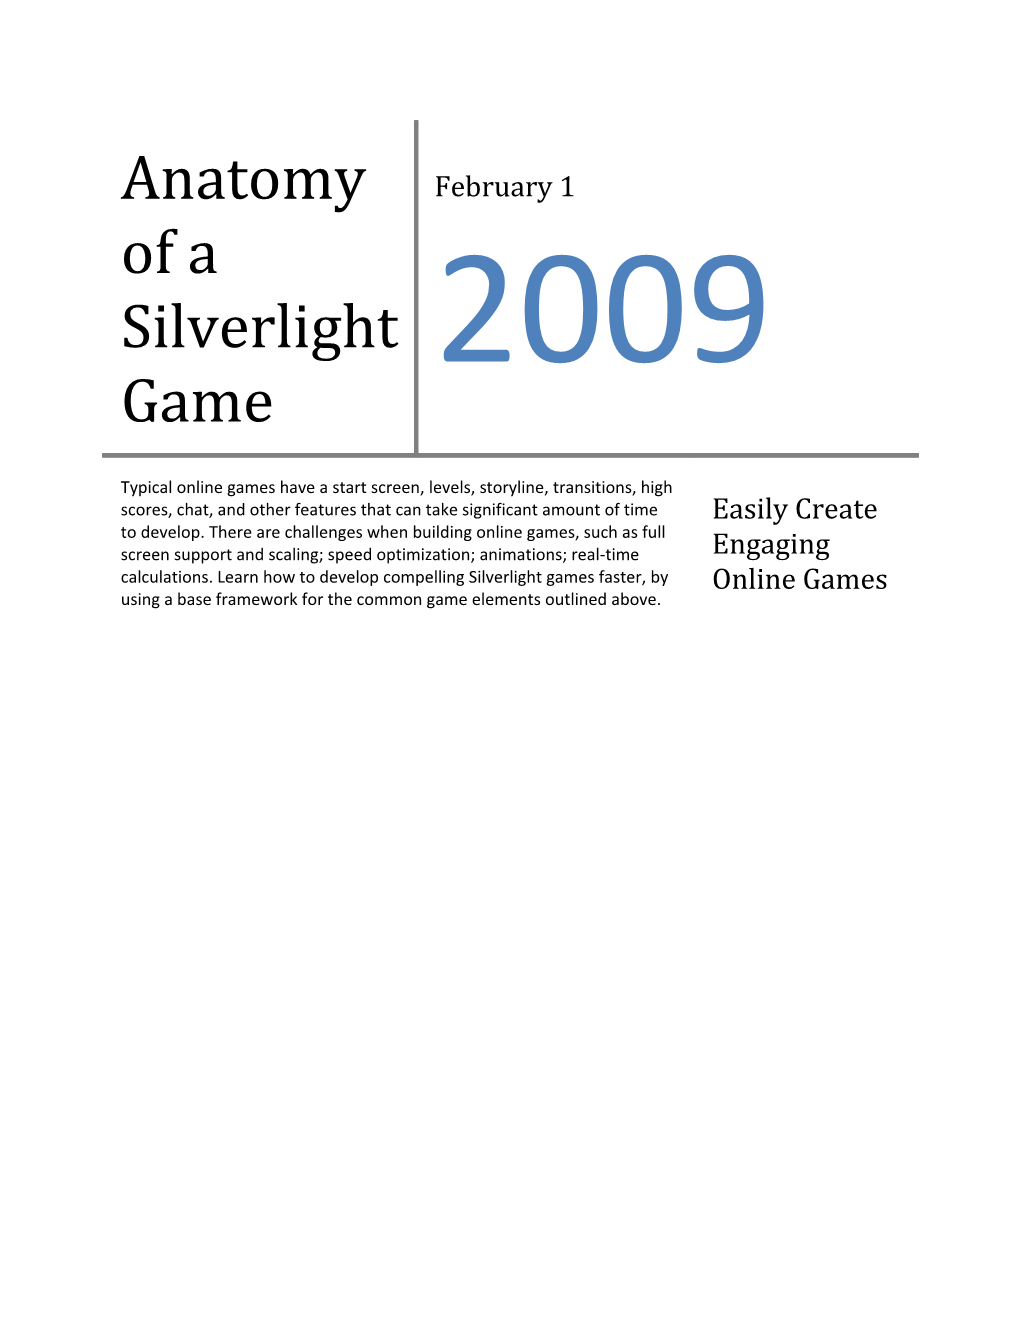 Anatomy of a Silverlight Game